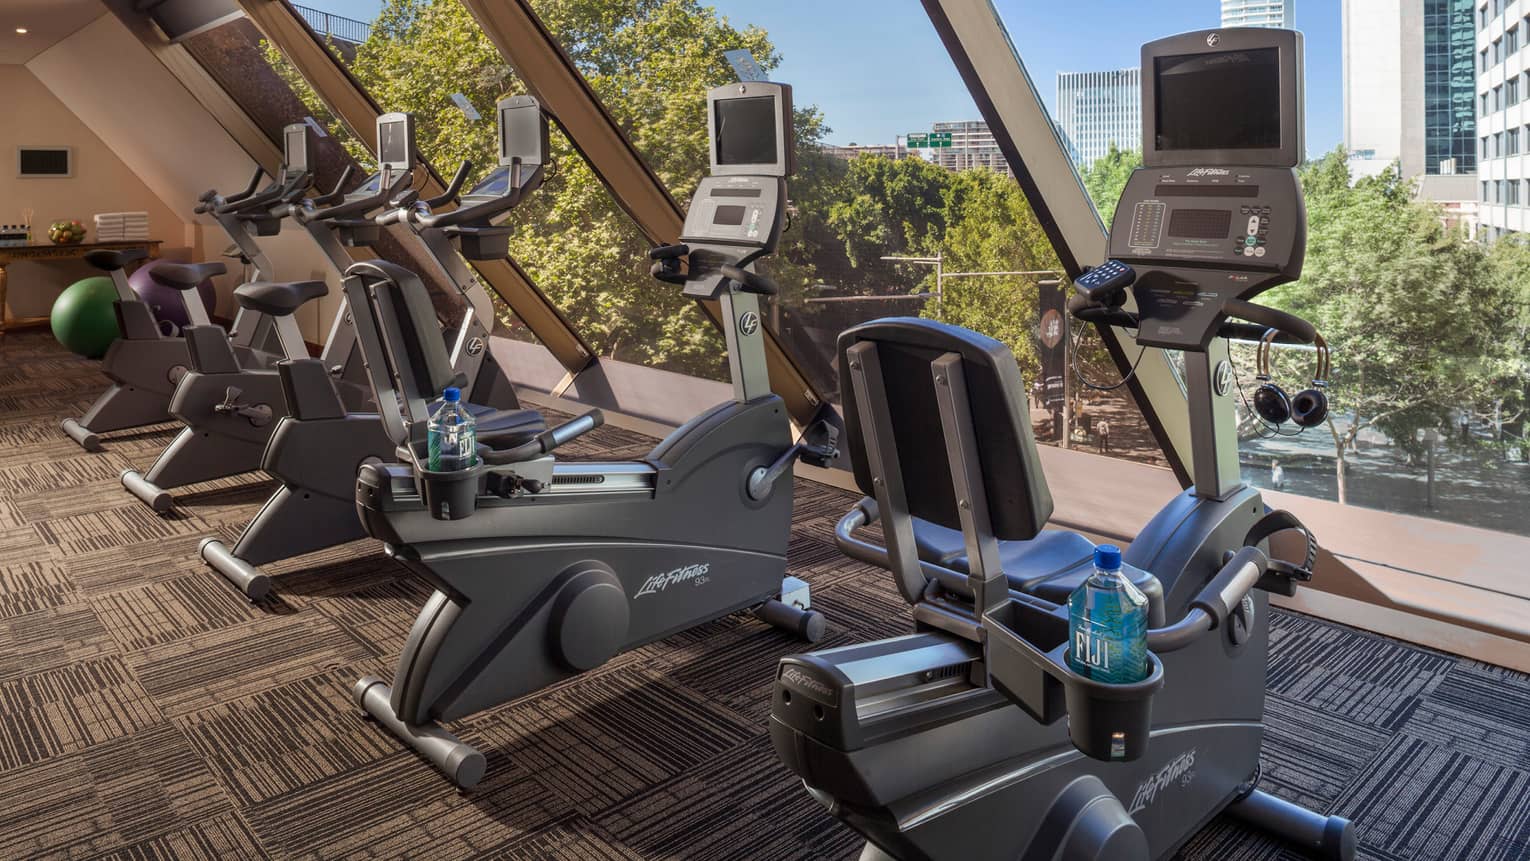 Cardio bikes, machines lined up by window in Fitness Centre